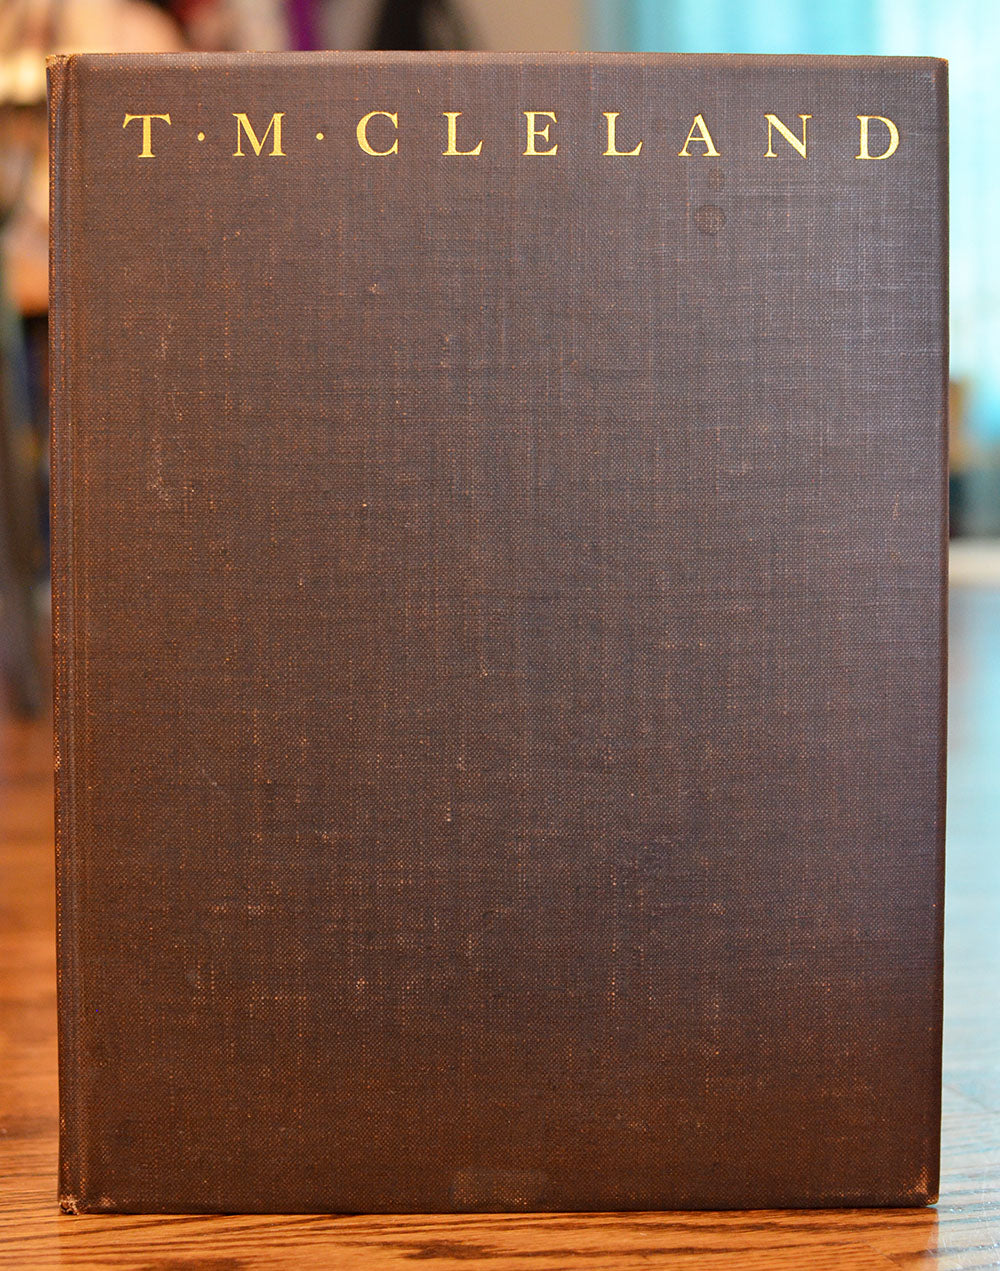 [Extra Illustrated with Two Letters] The Decorative Work of T.M. Cleland